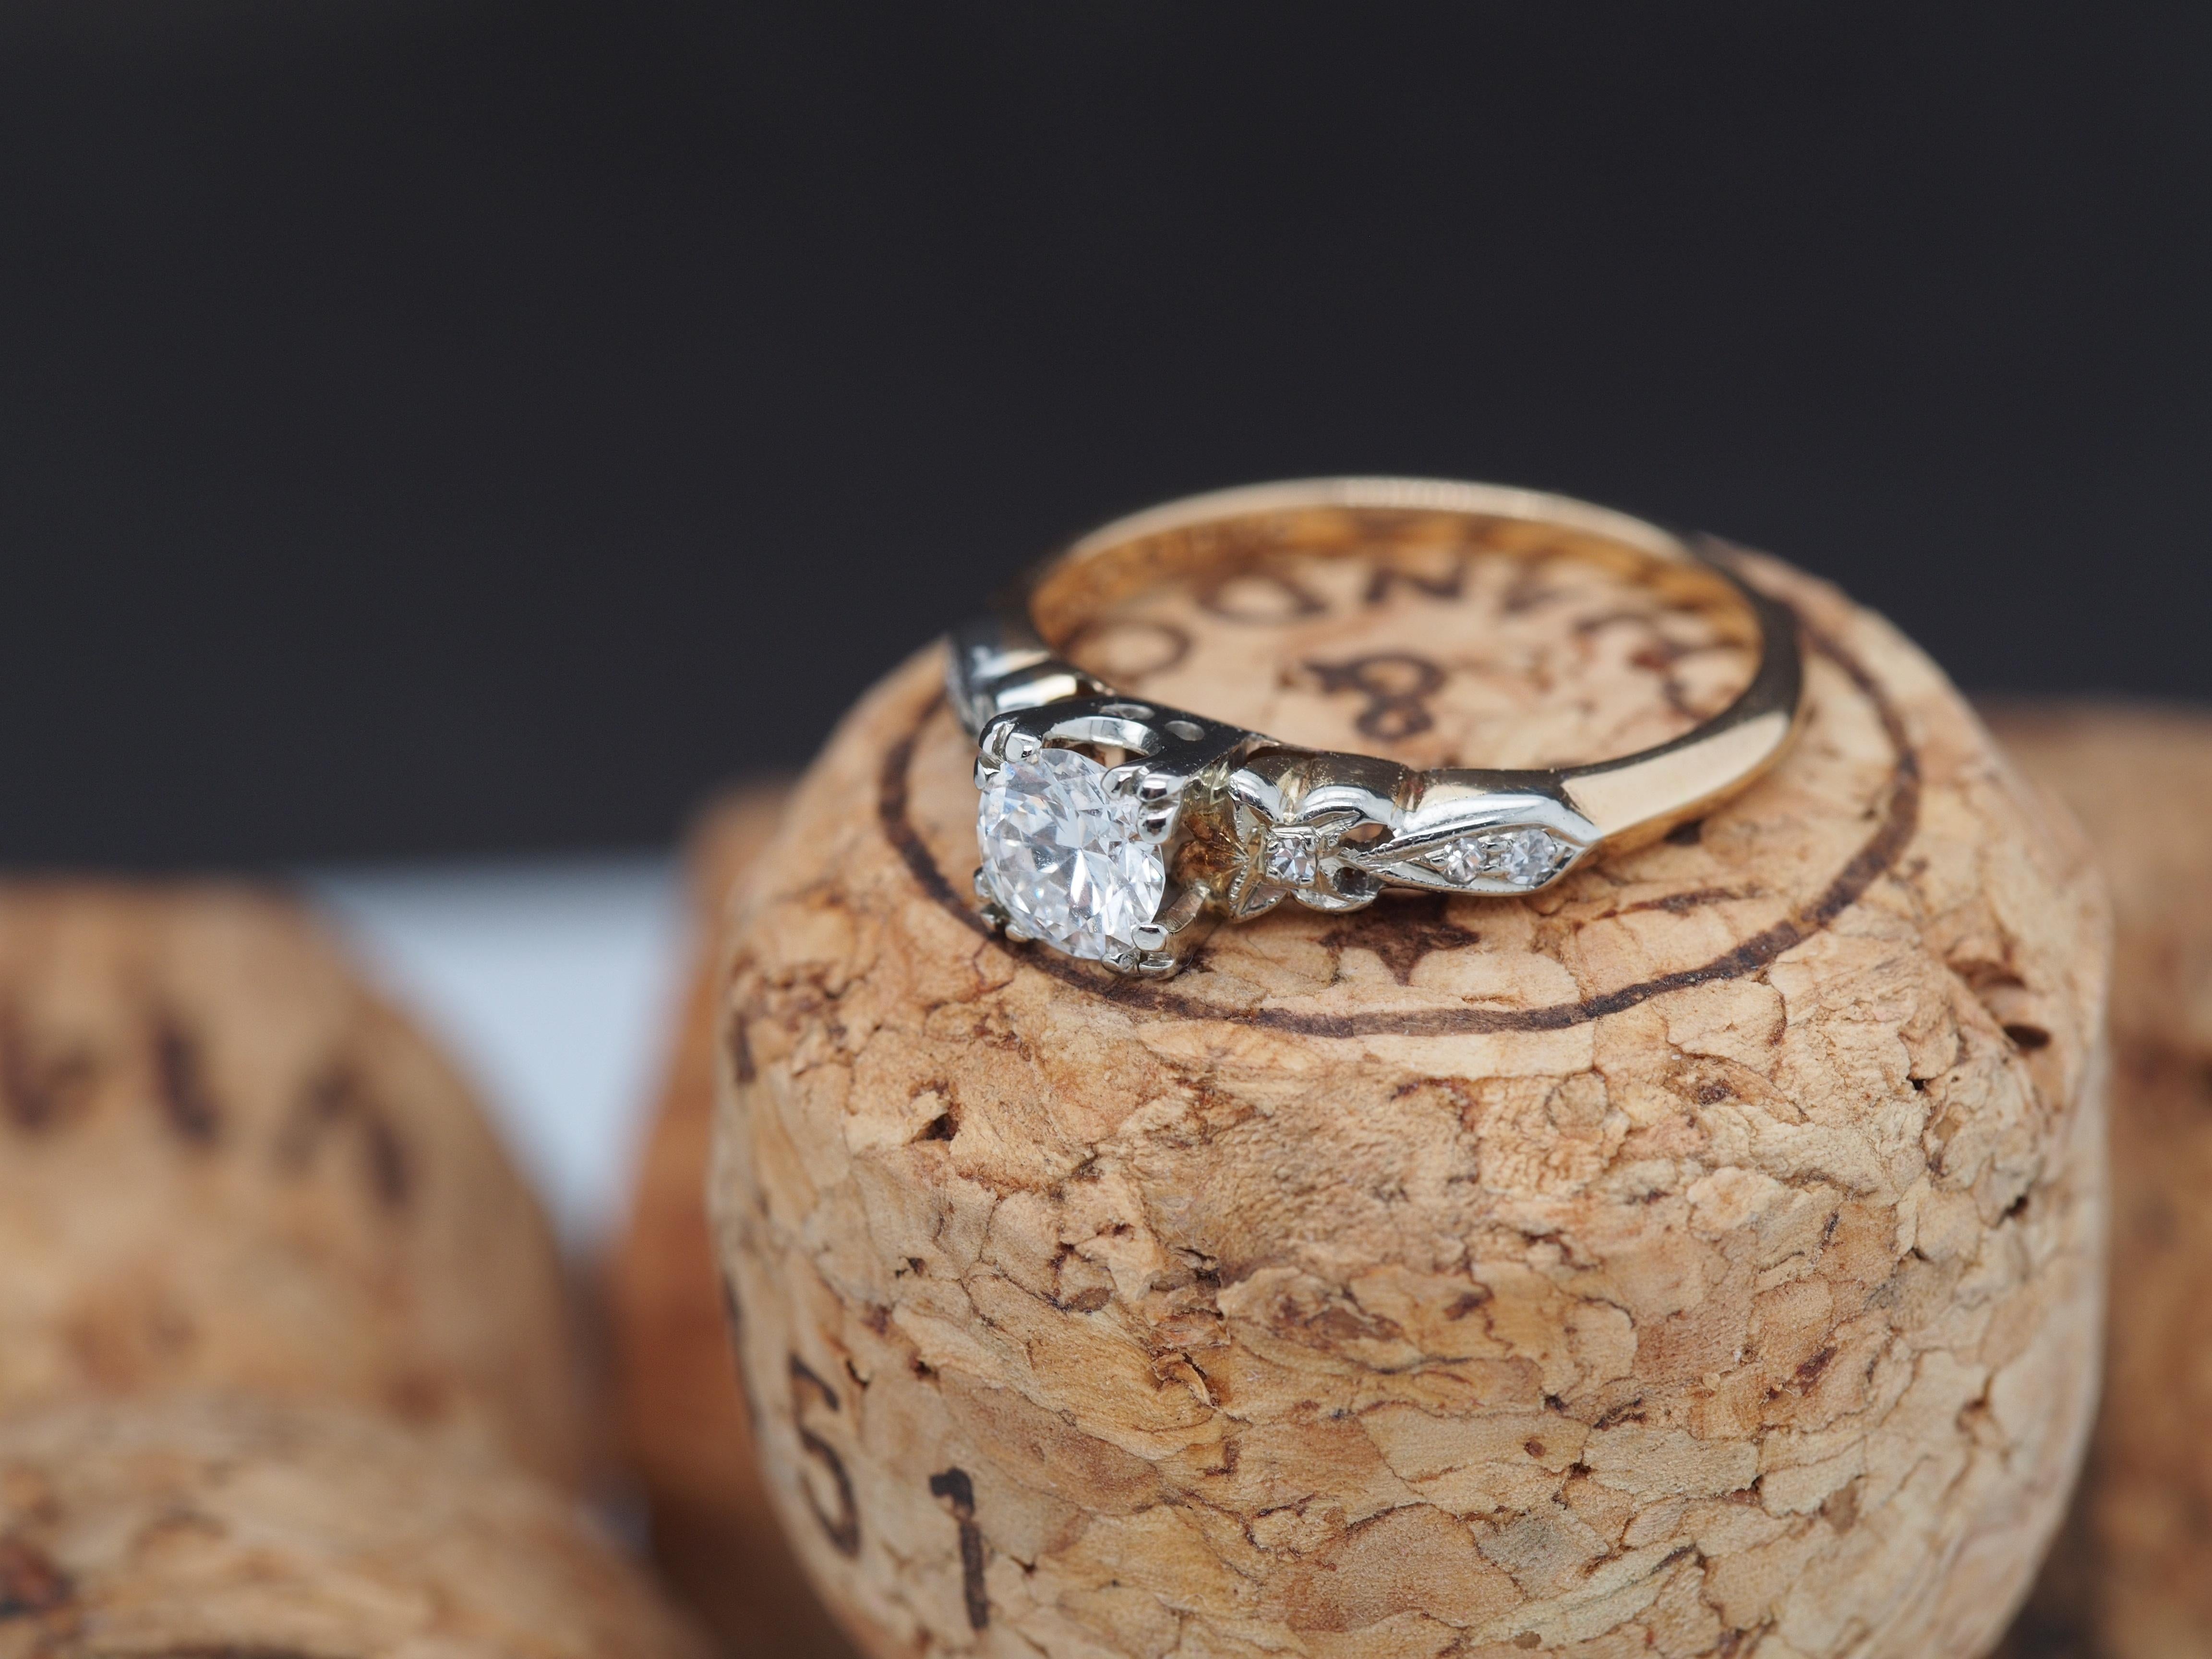 Year: 1930s
Item Details:
Ring Size: 4.75
Metal Type: 14K & 18K Yellow Gold [Hallmarked, and Tested]
Weight: 1.7 grams
Diamond Details
Center Diamond: .40ct, Old European Brilliant, Natural Diamond, F Color, VS Clarity
Side Diamonds: .08ct, total